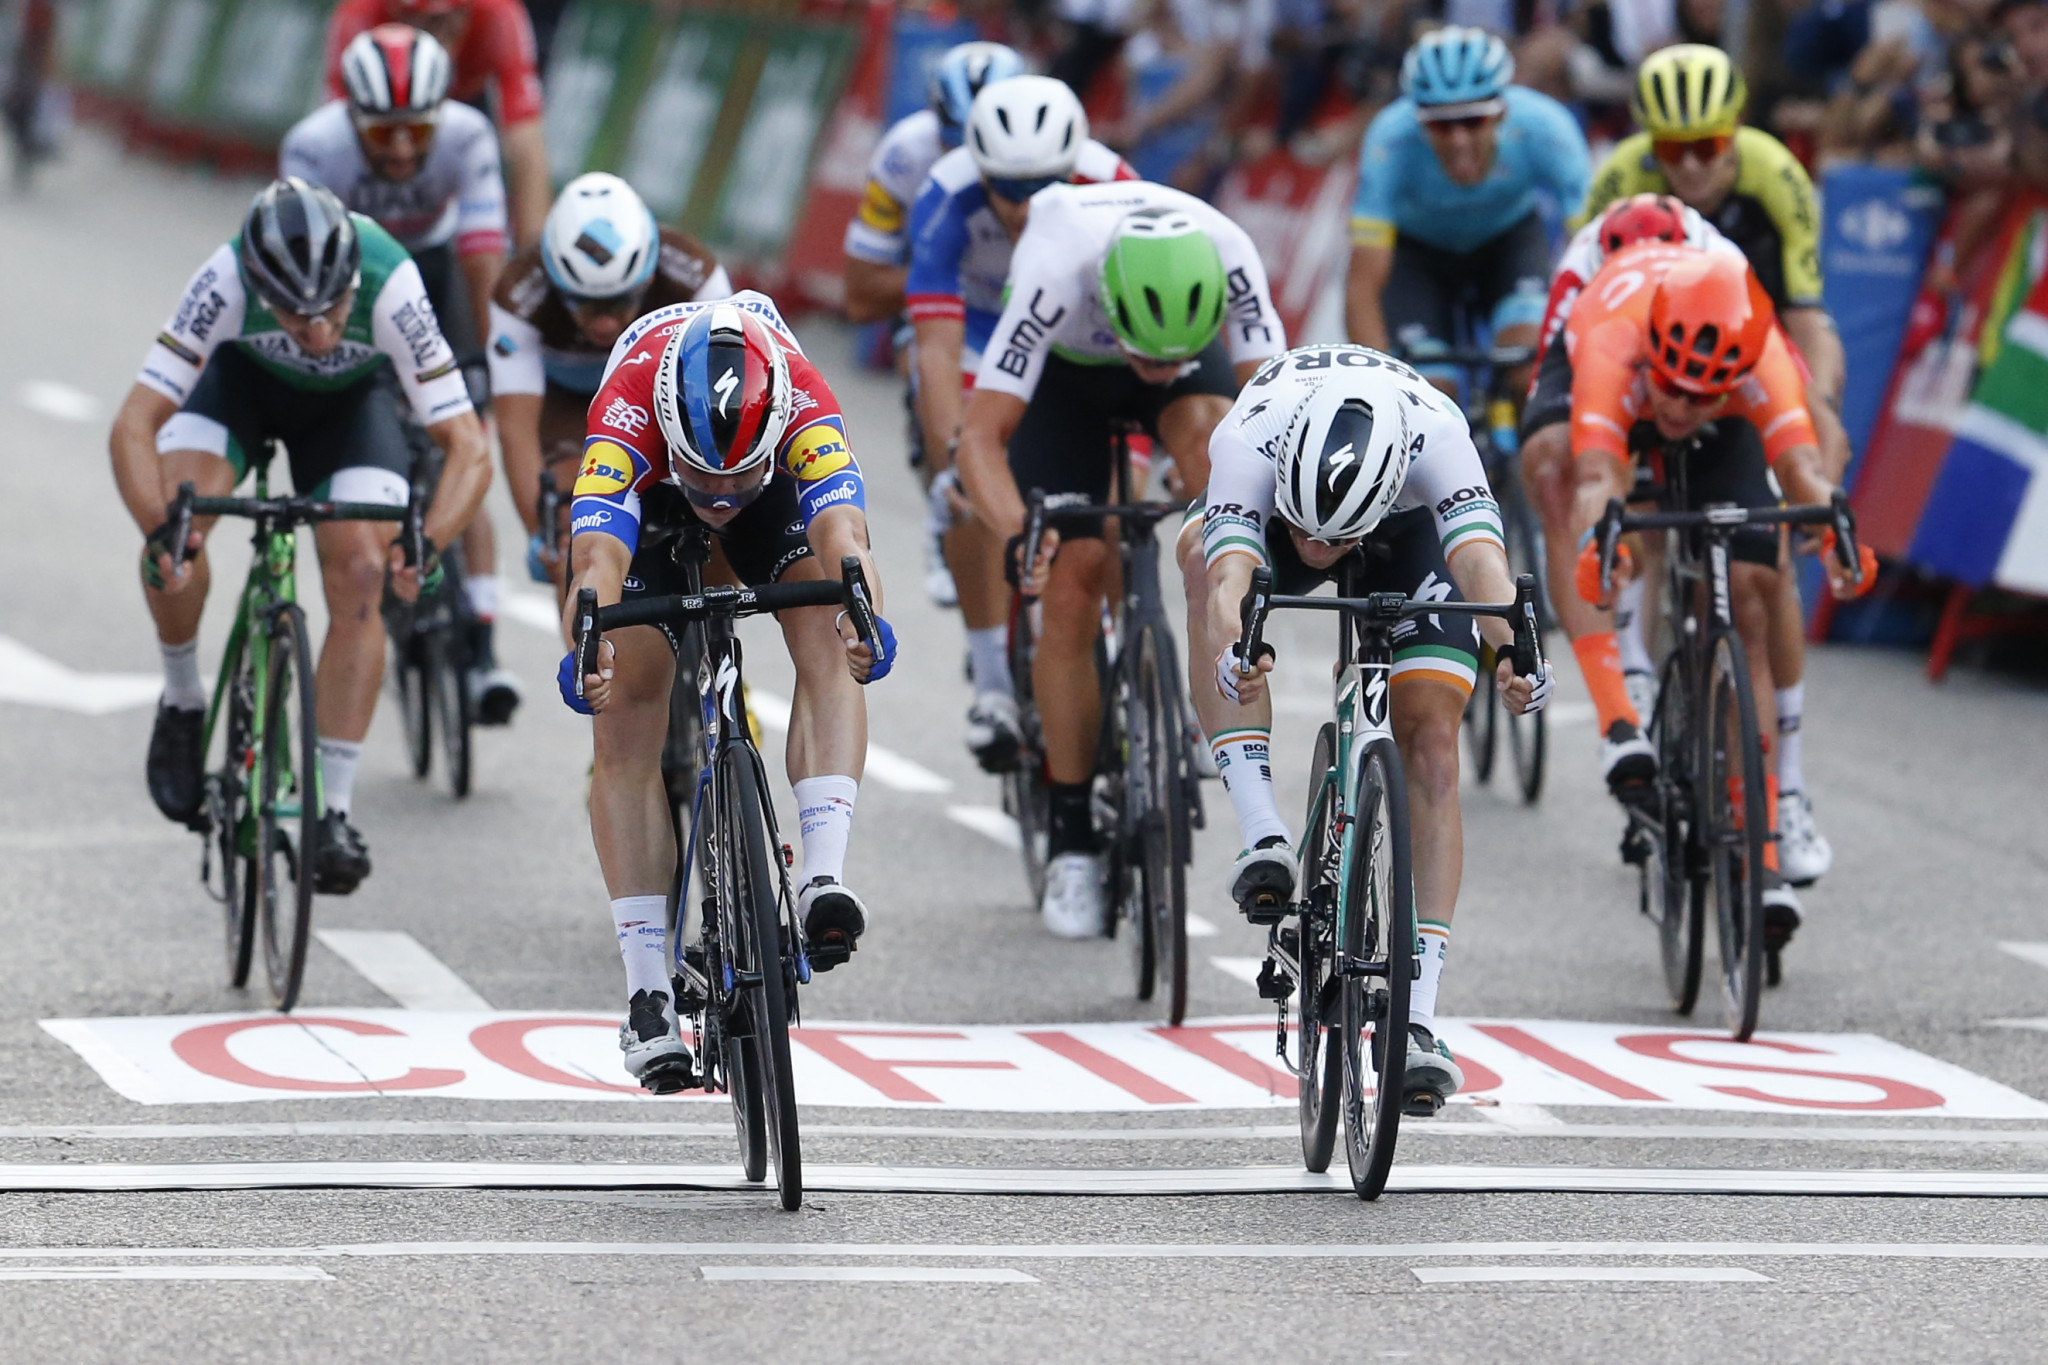 This year's Vuelta a España is scheduled to take place from October 20 to November 8 ©Getty Images